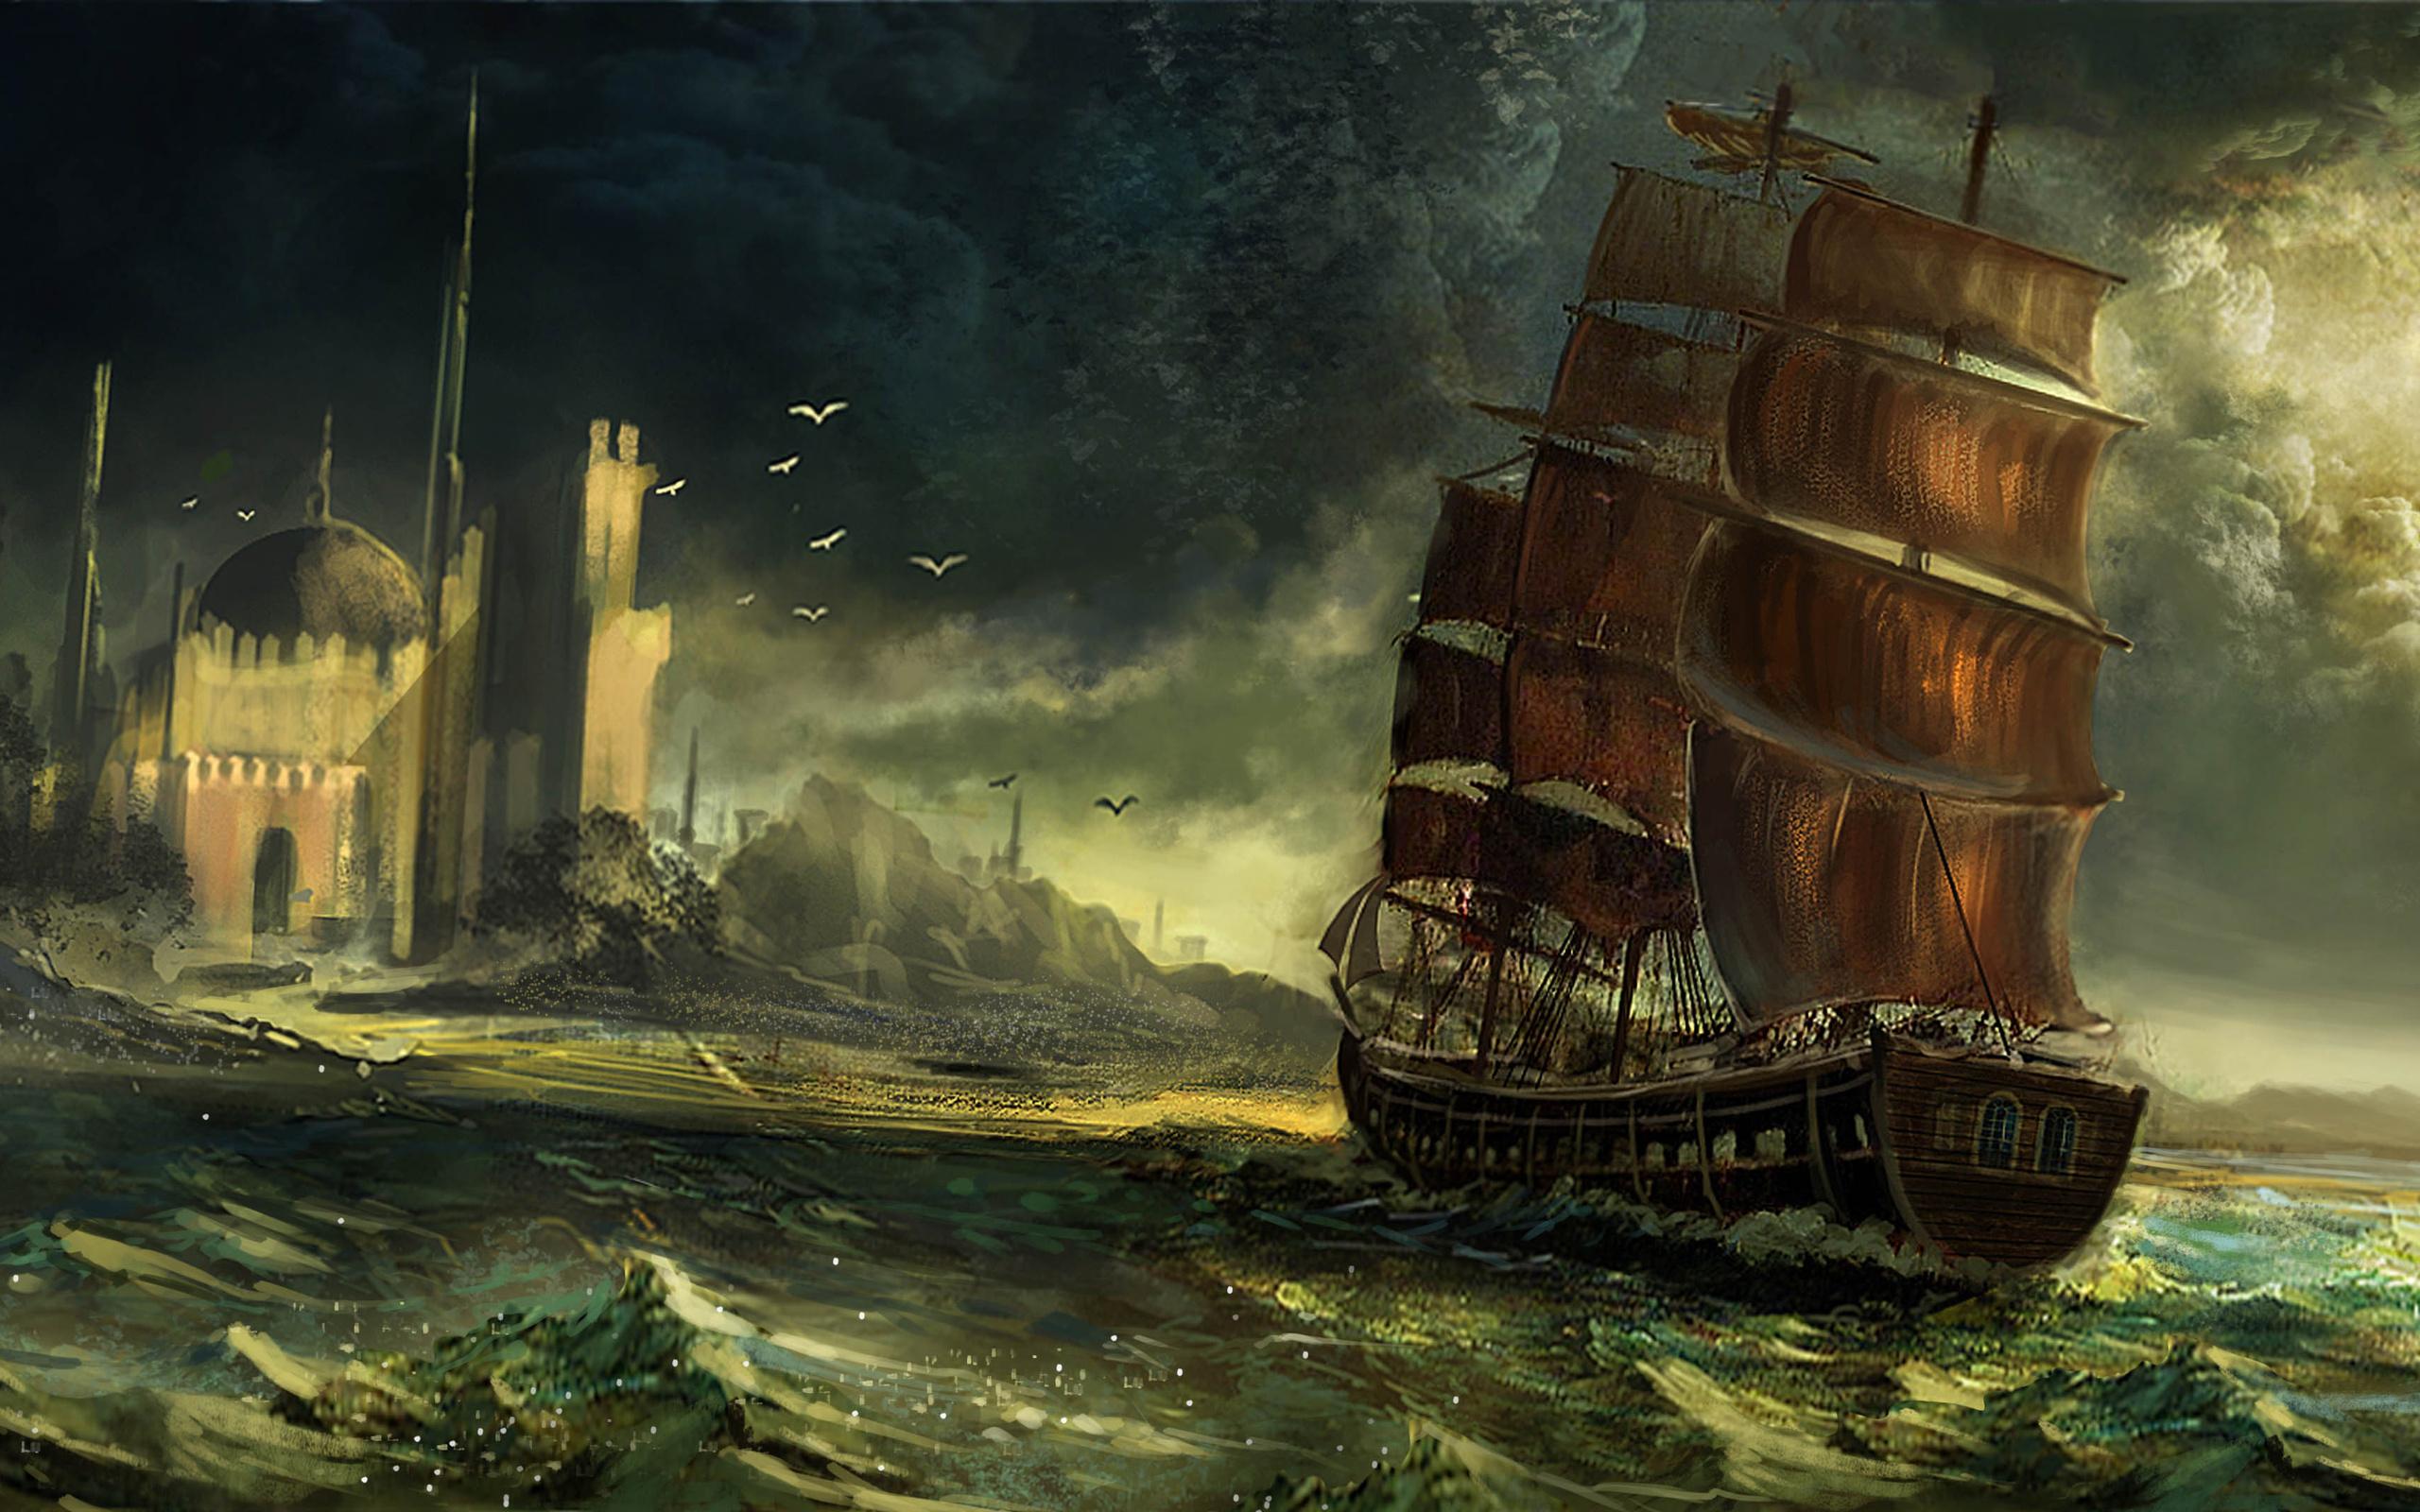 Pirate ship in the strom Wallpapers HD